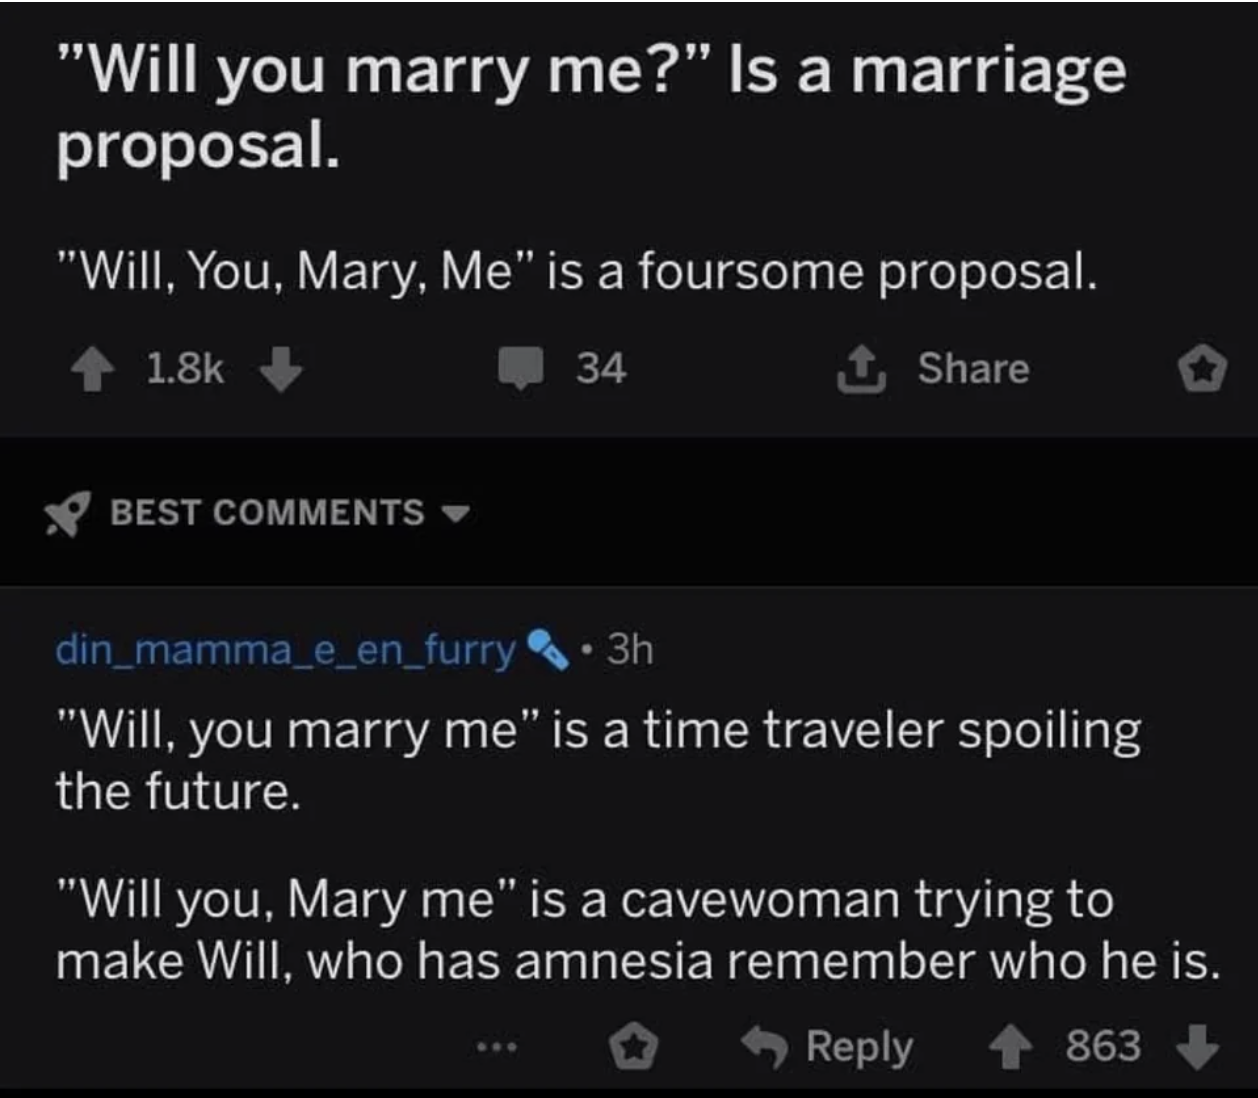 The joke says &quot;will you marry me&quot; is a foursome proposal if you break up the words individually; a commenter says &quot;will you, Mary me&quot; is a cavewoman trying to make an amnesiac named Will remember both her and himself